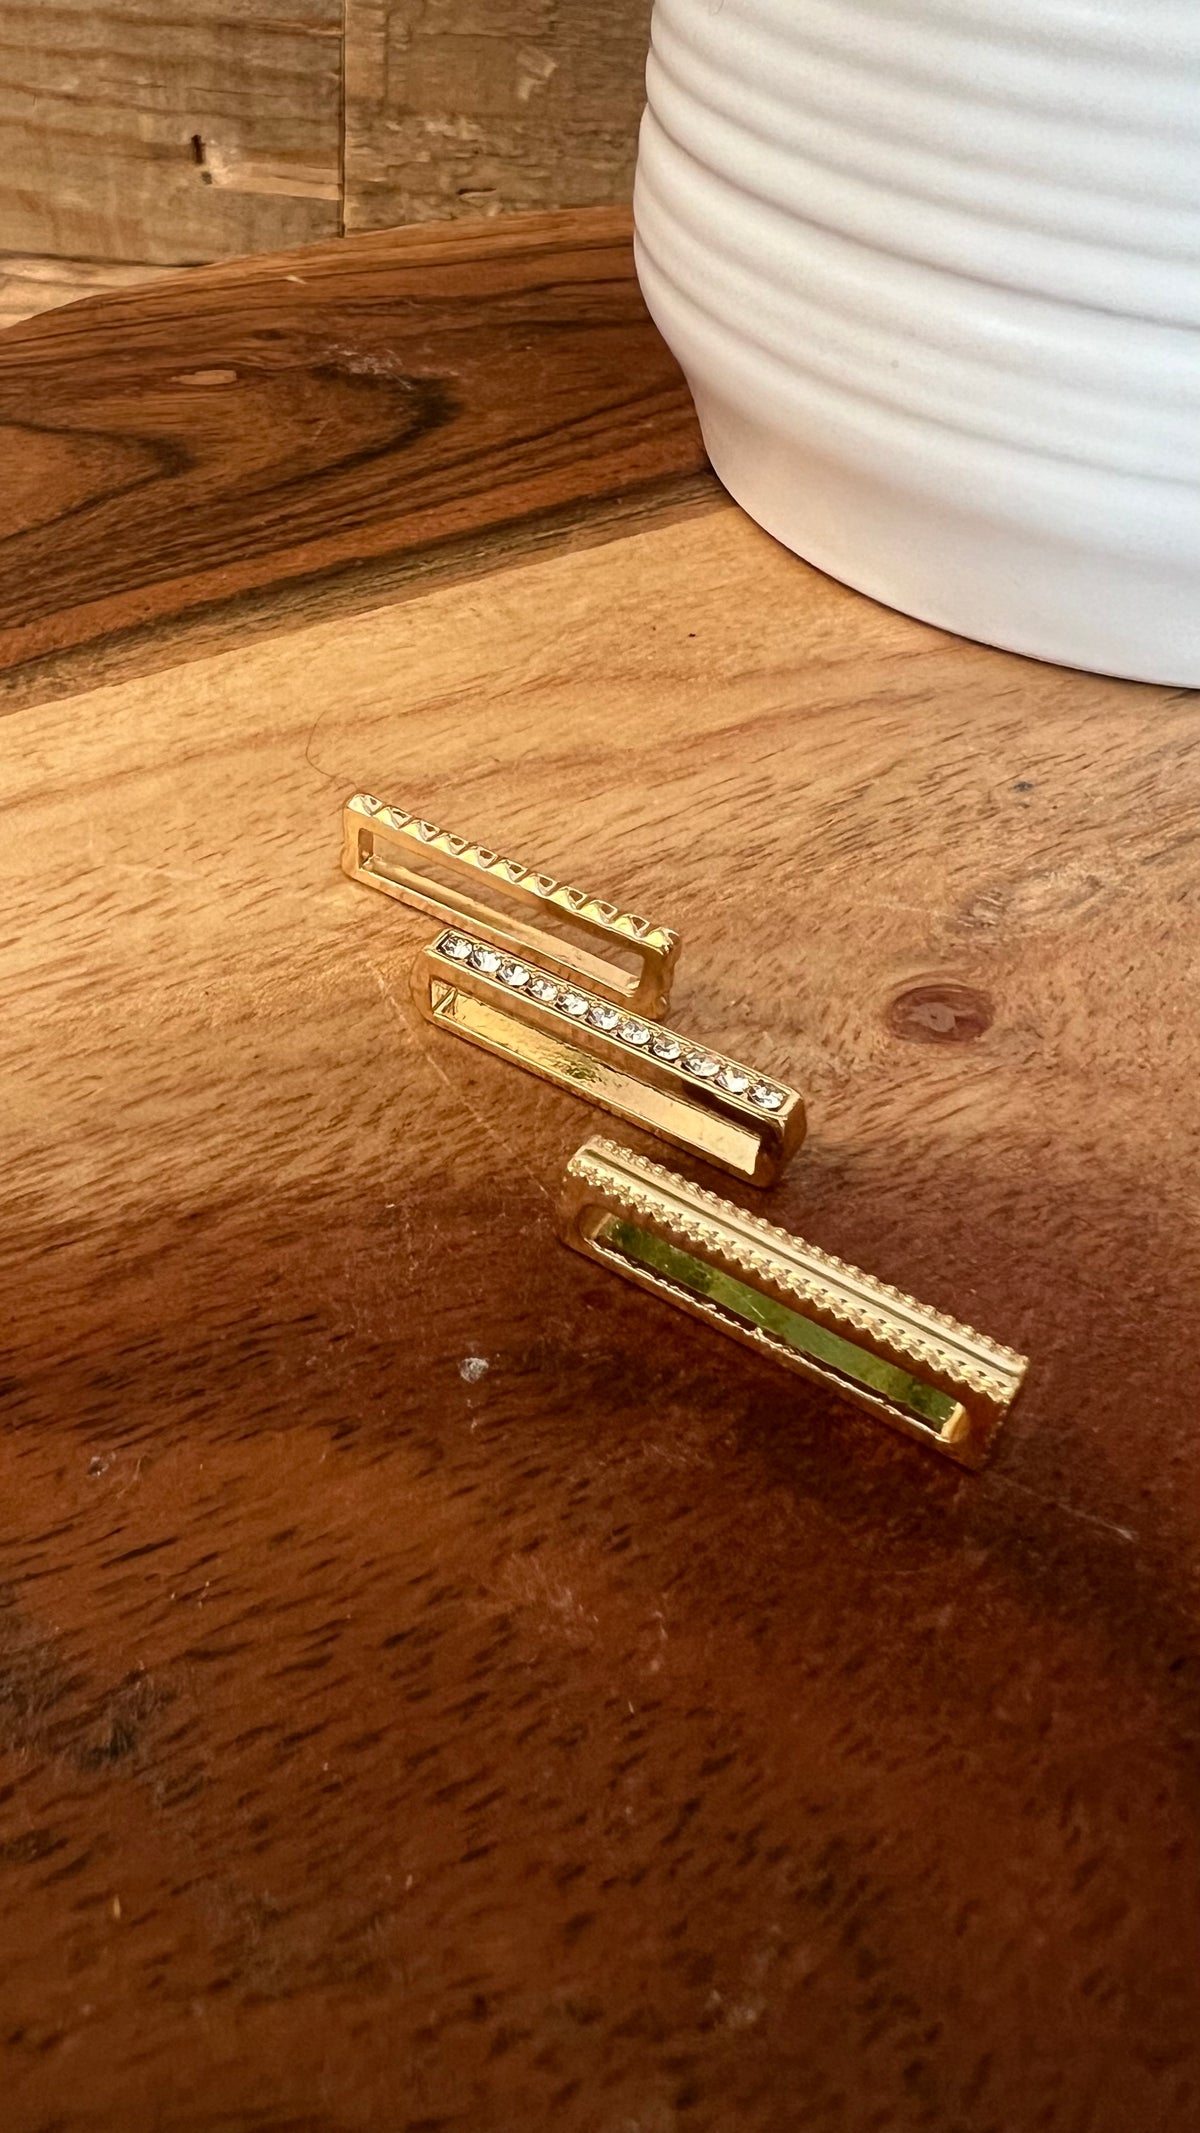 APPLE WATCH BAND CHARMS